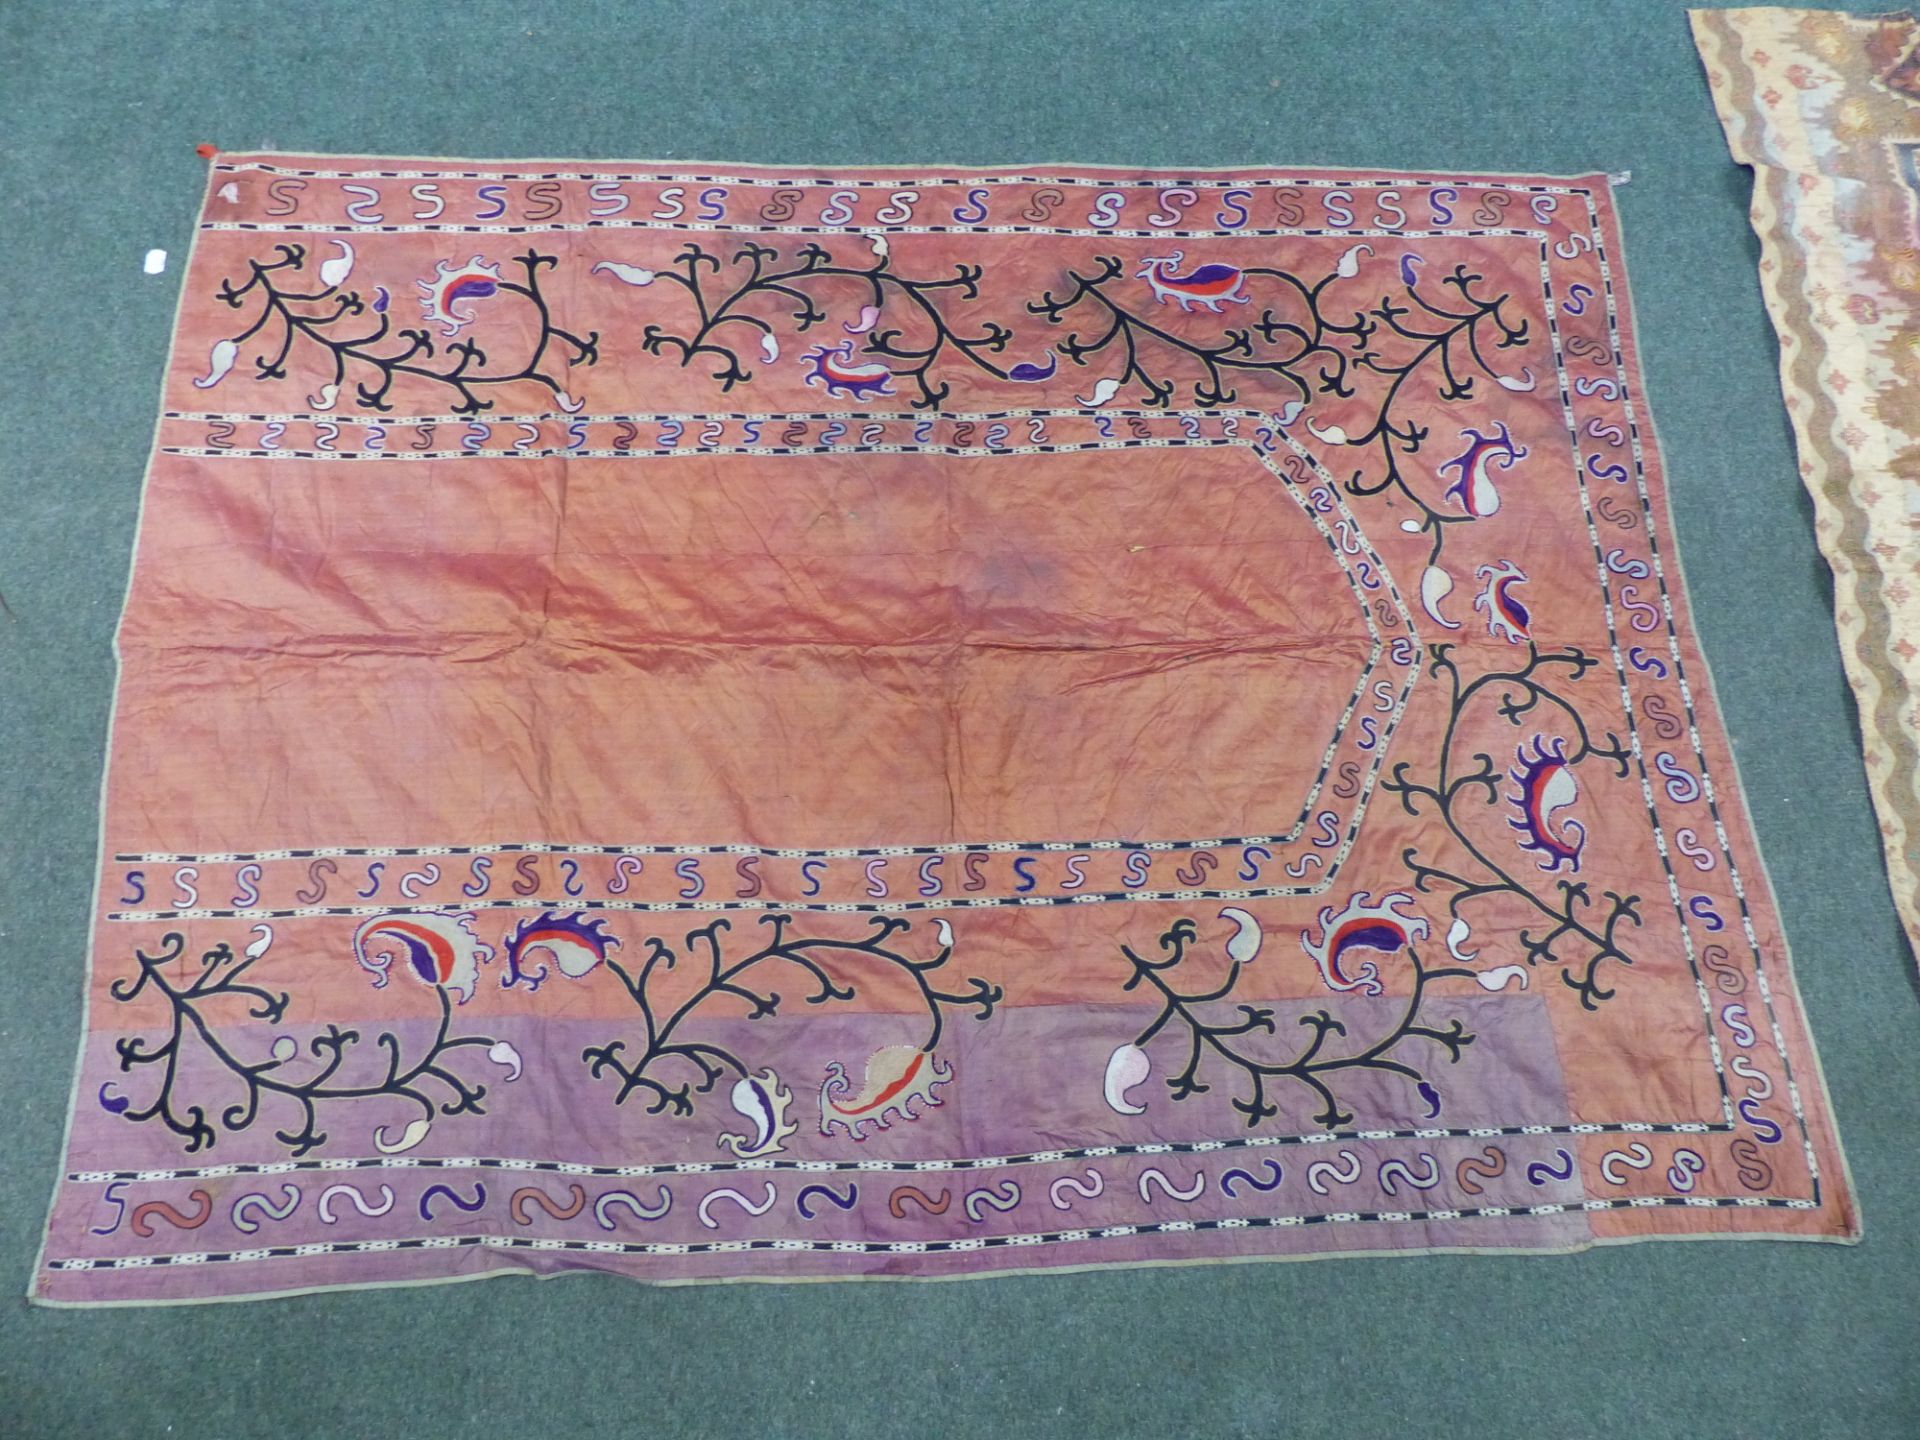 TWO EASTERN PANELS TOGETHER WITH SILK SARI - Image 12 of 14